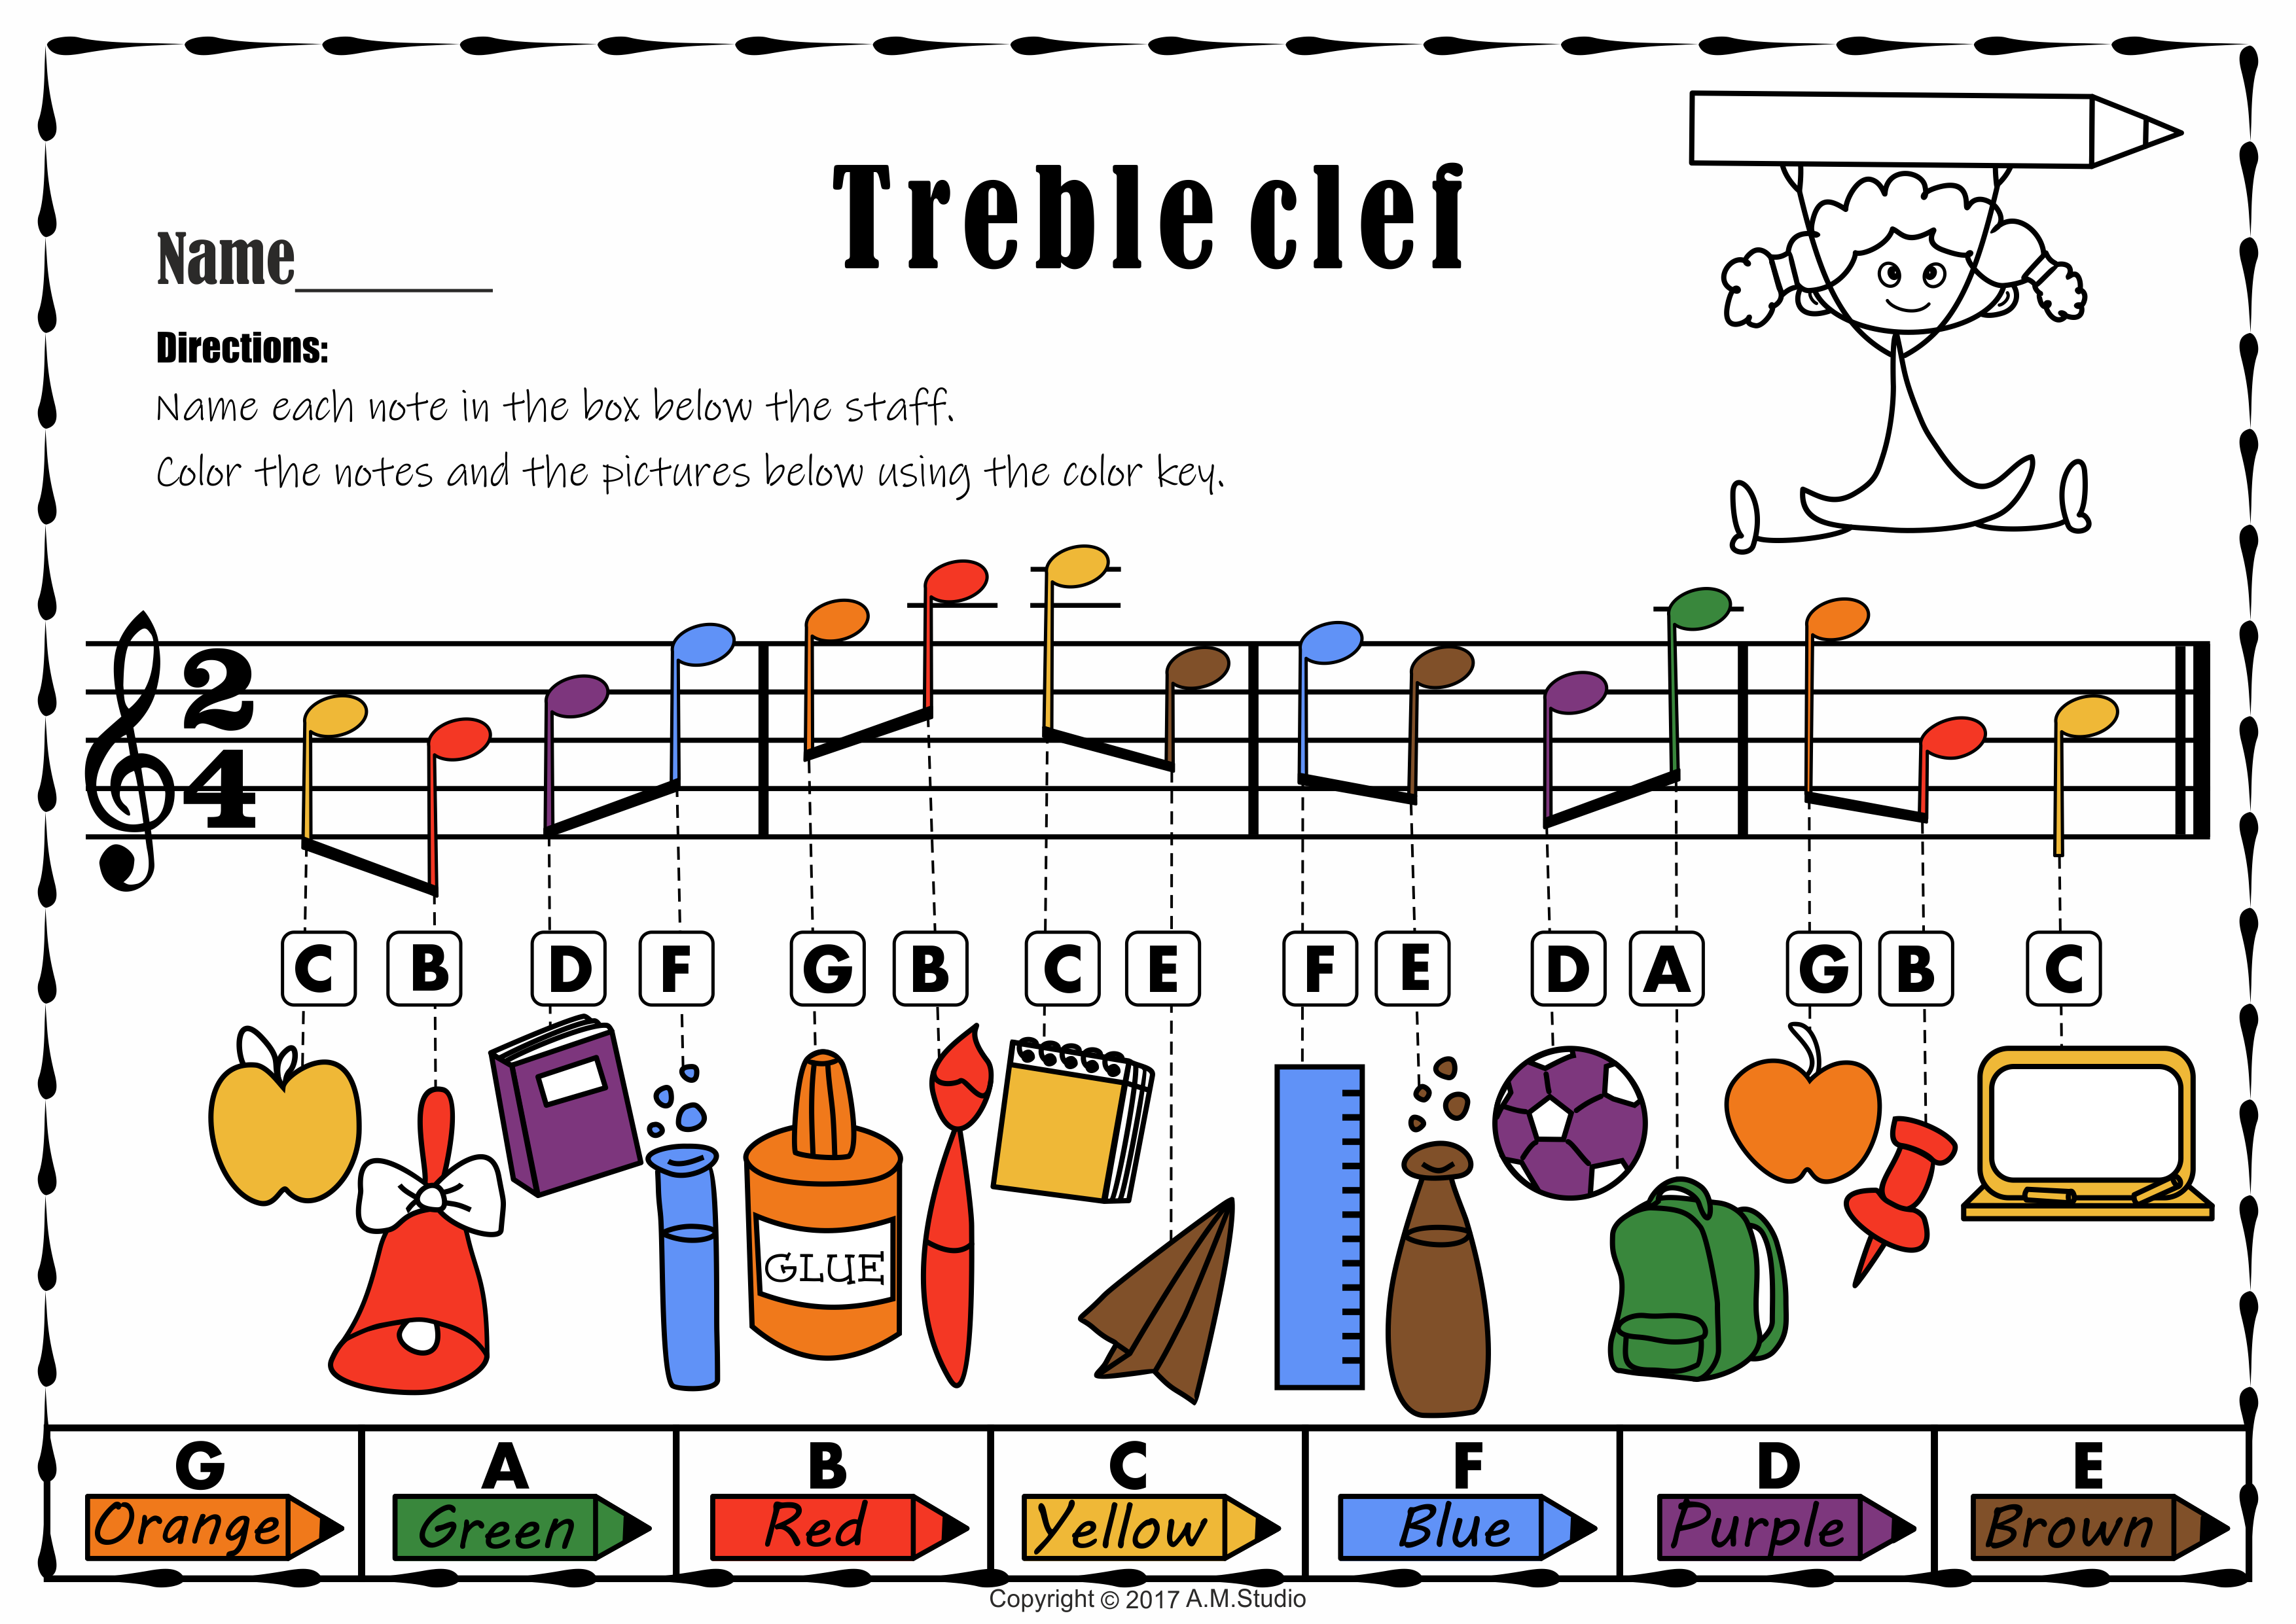 Back to School Treble Clef Note Naming Practice Worksheets (img # 3)